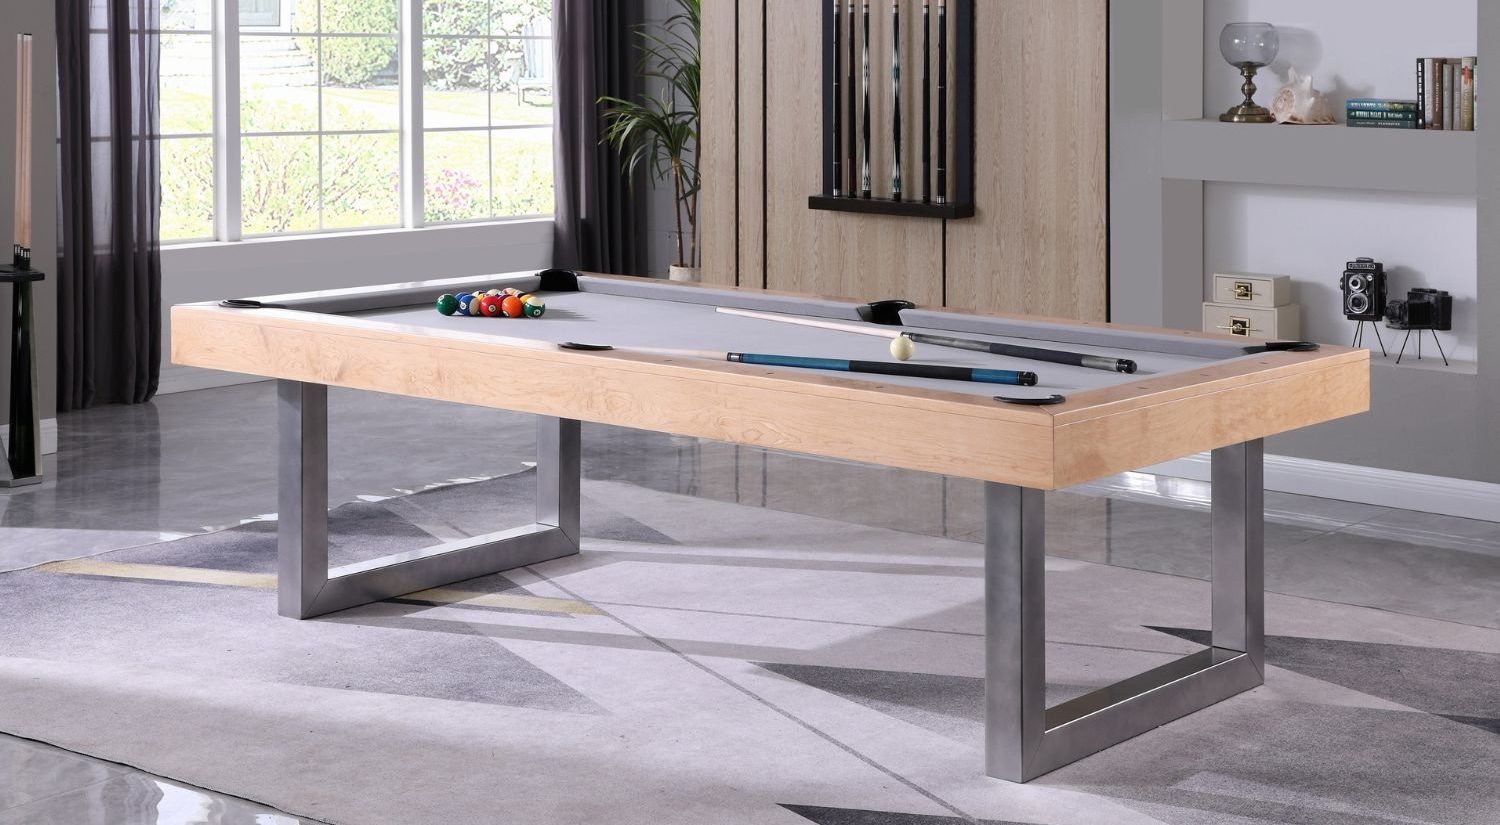 Pool Table Room Ideas for Small Rooms